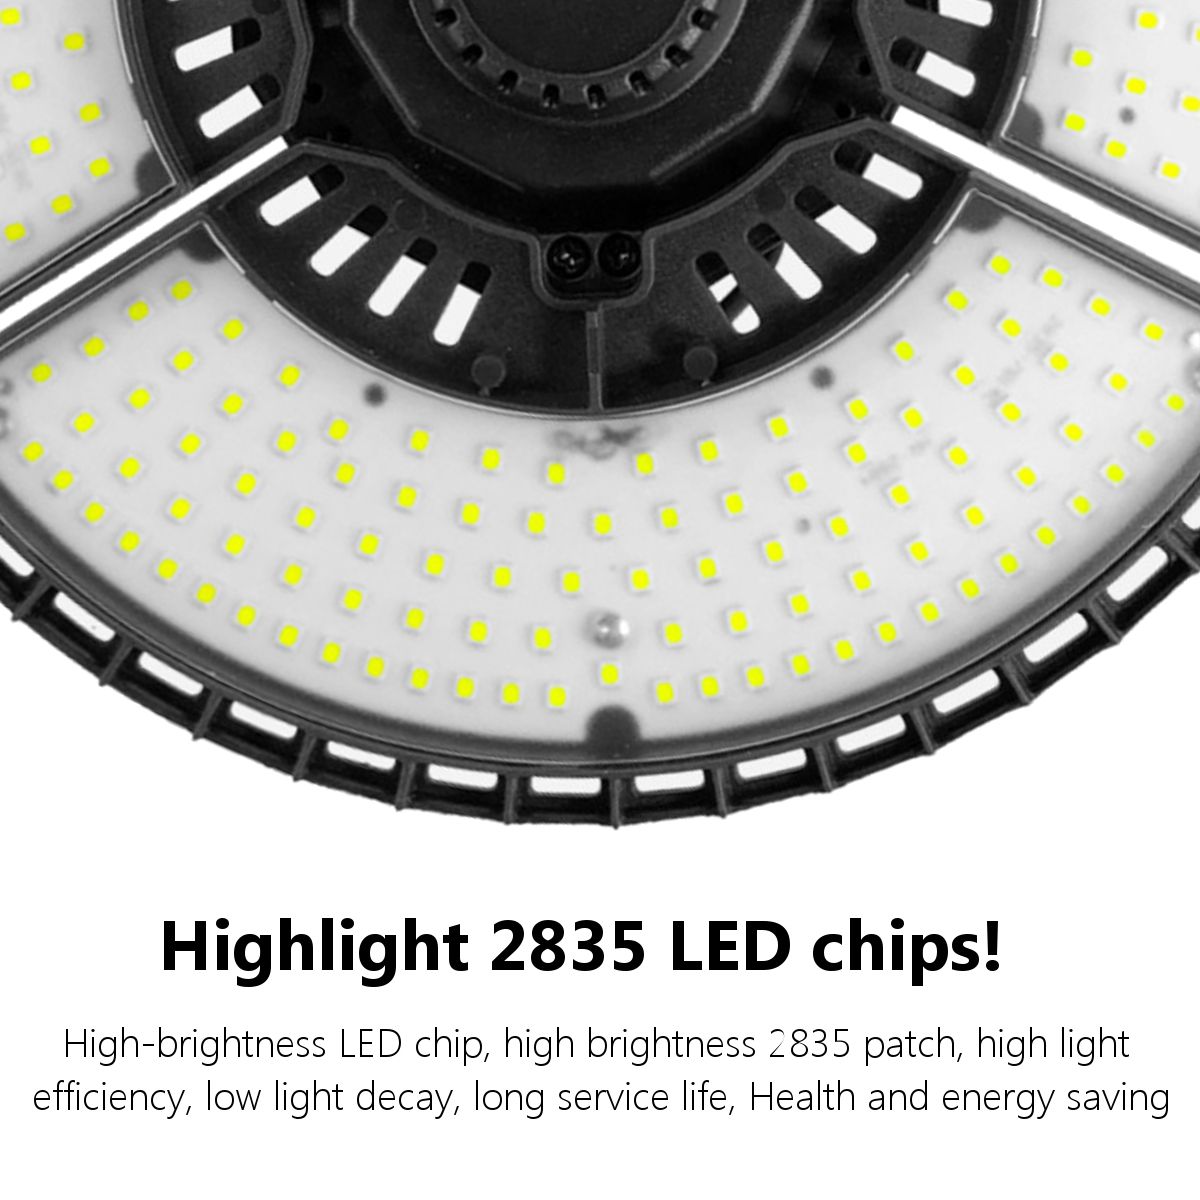 60W-80W-E27-LED-Garage-Light-Bulb-Ceiling-Fixture-Shop-Workshop-Deformable-Lamp-with-Remote-Control-1744890